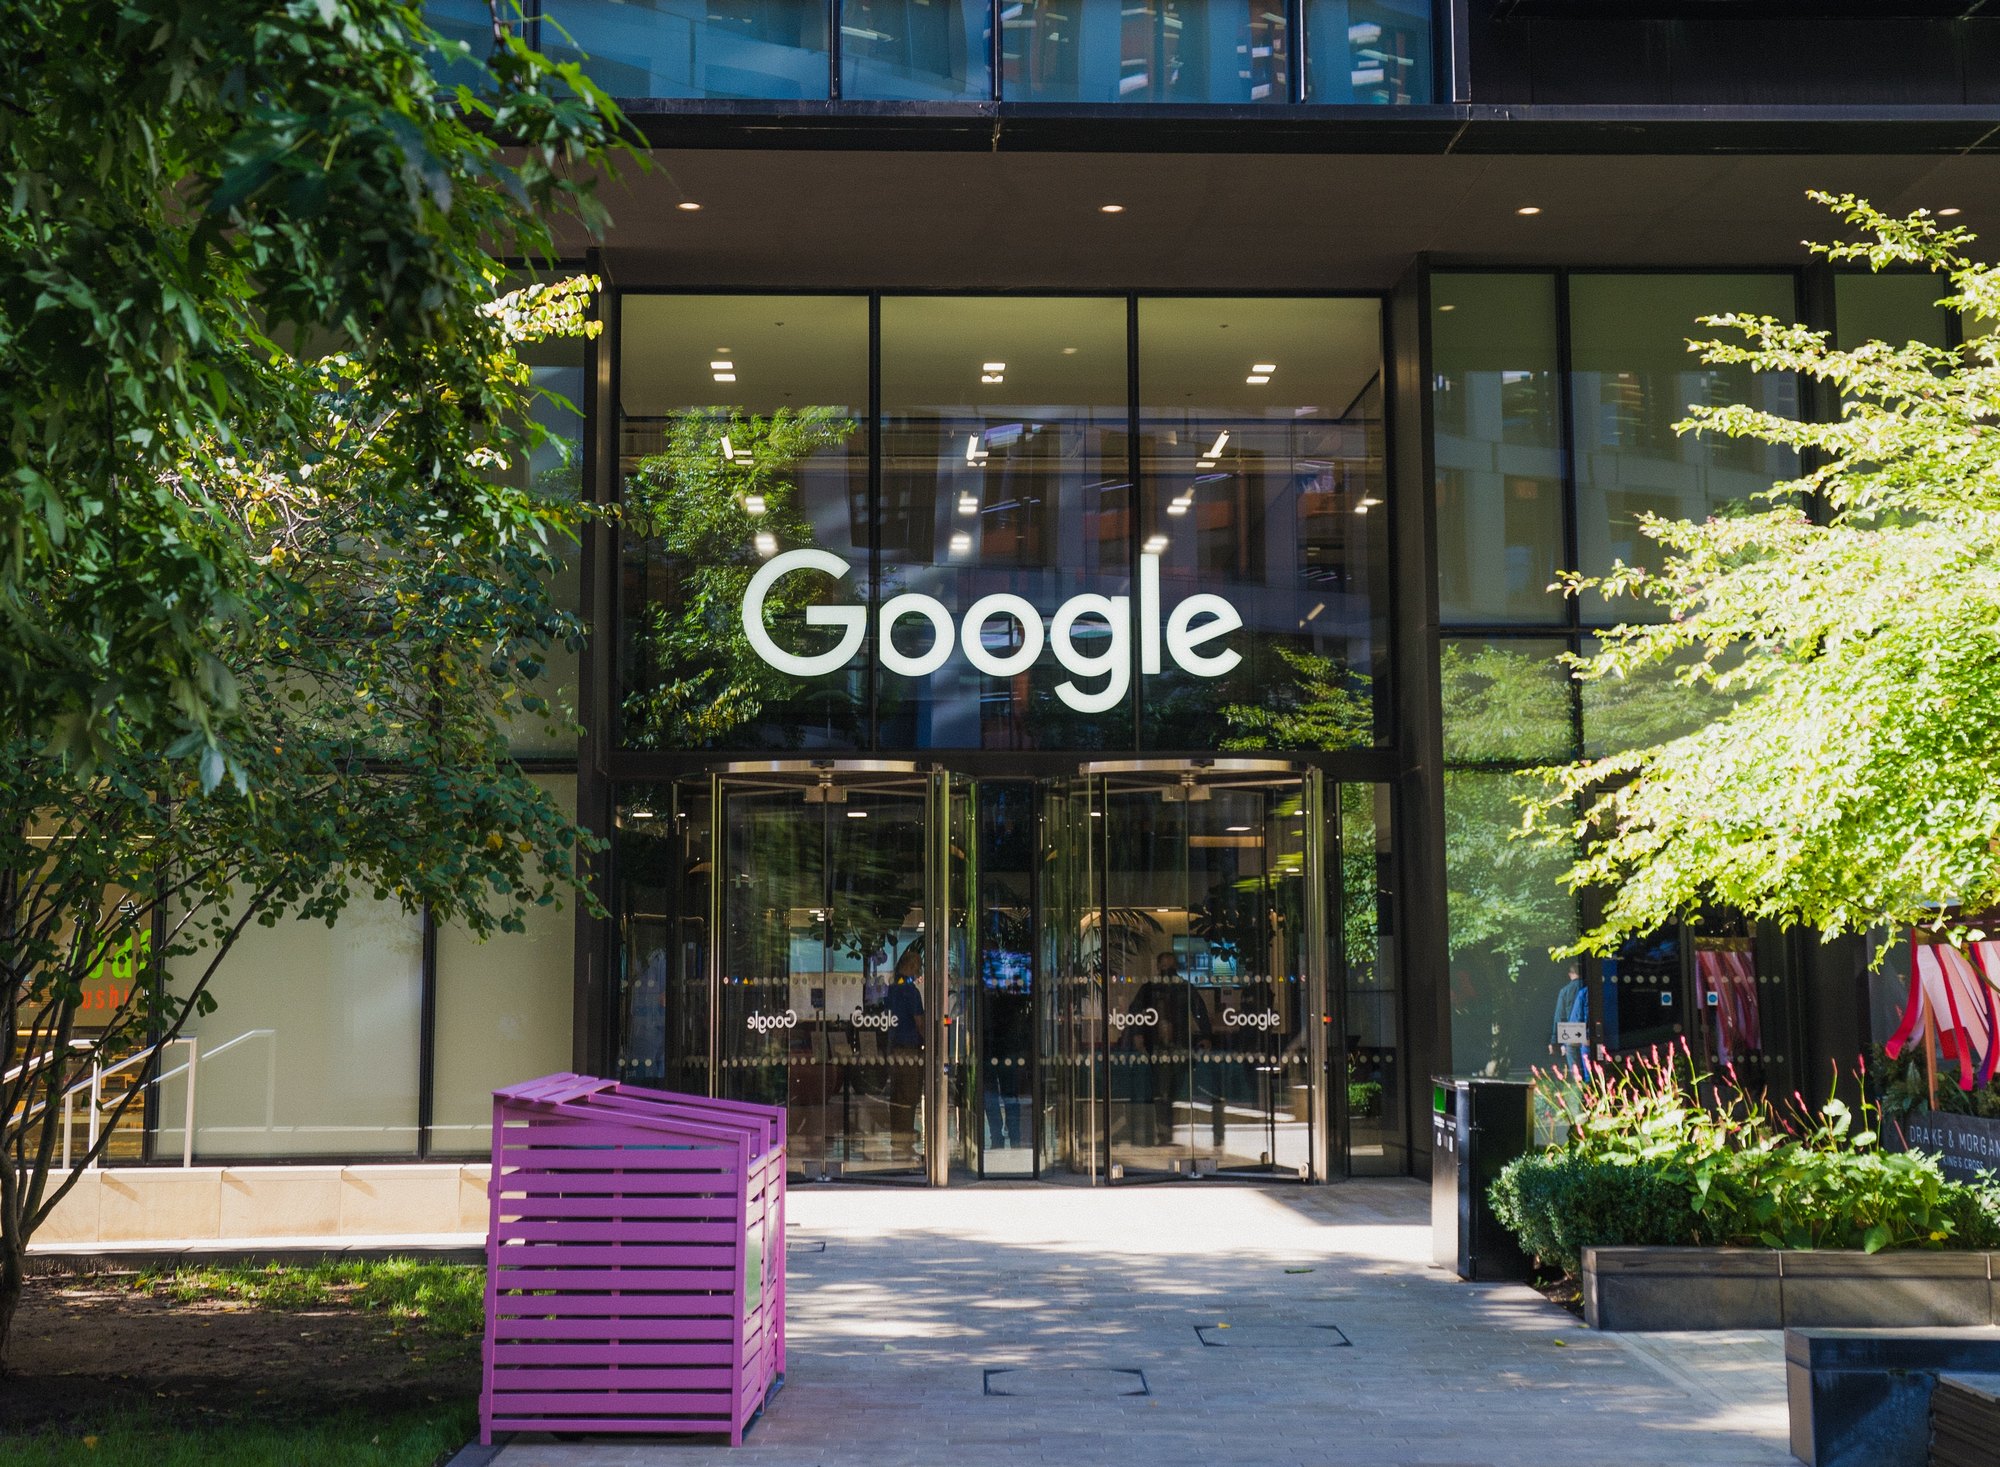 Google faces lawsuits in UK and EU seeking £21.6bn in damages